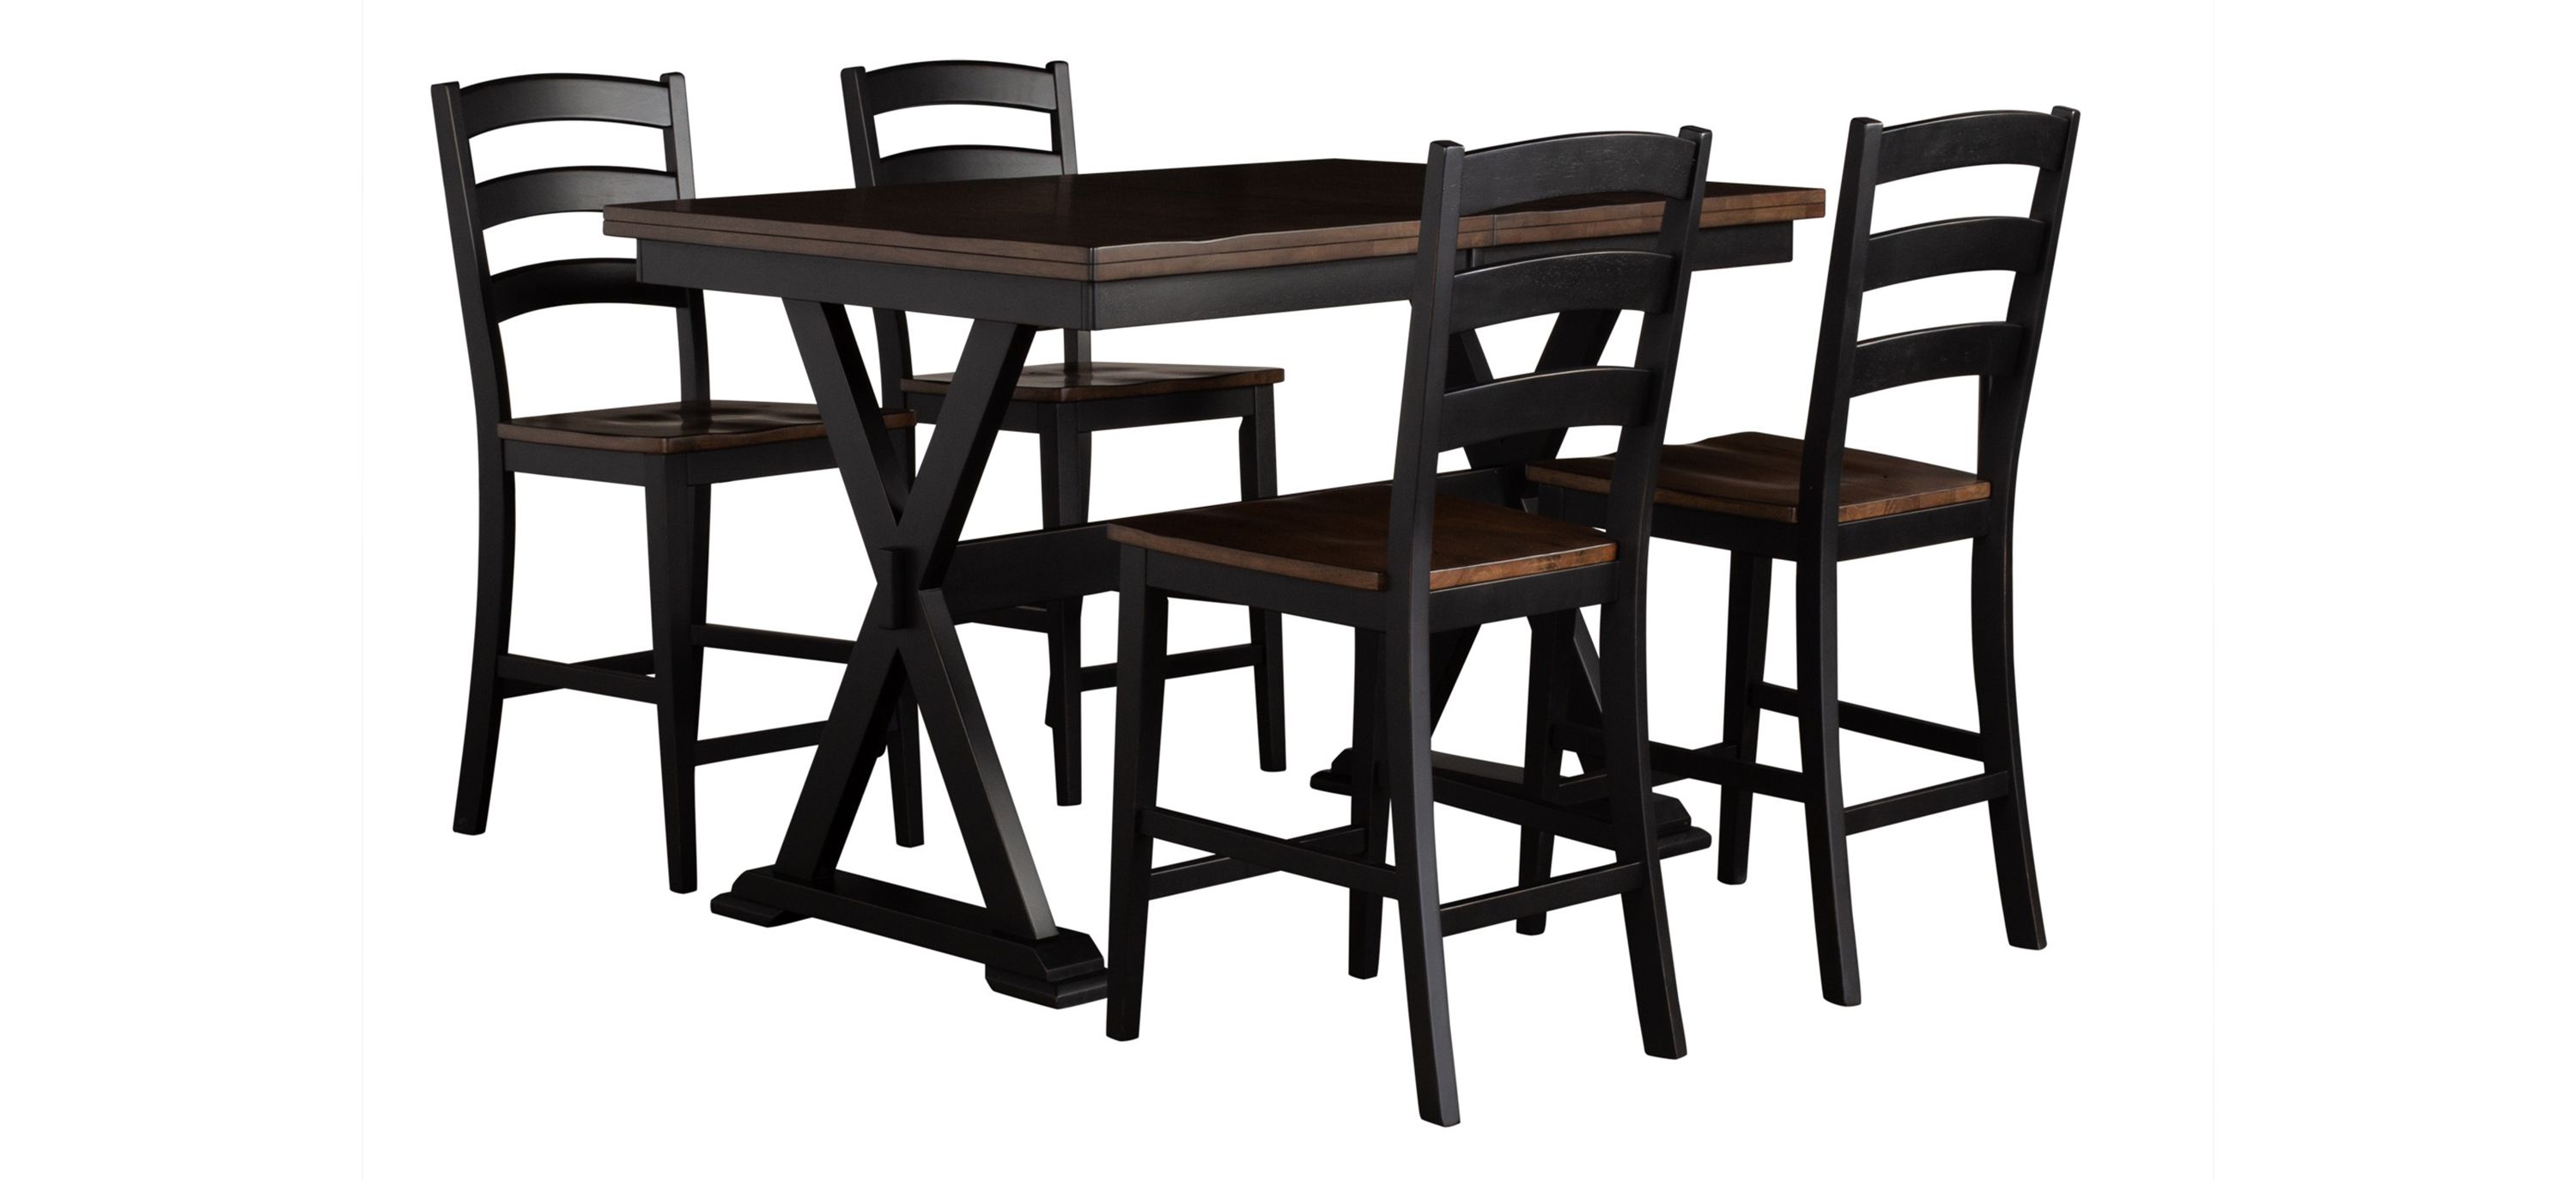 Stone Creek 5-pc. Counter-Height Dining Set